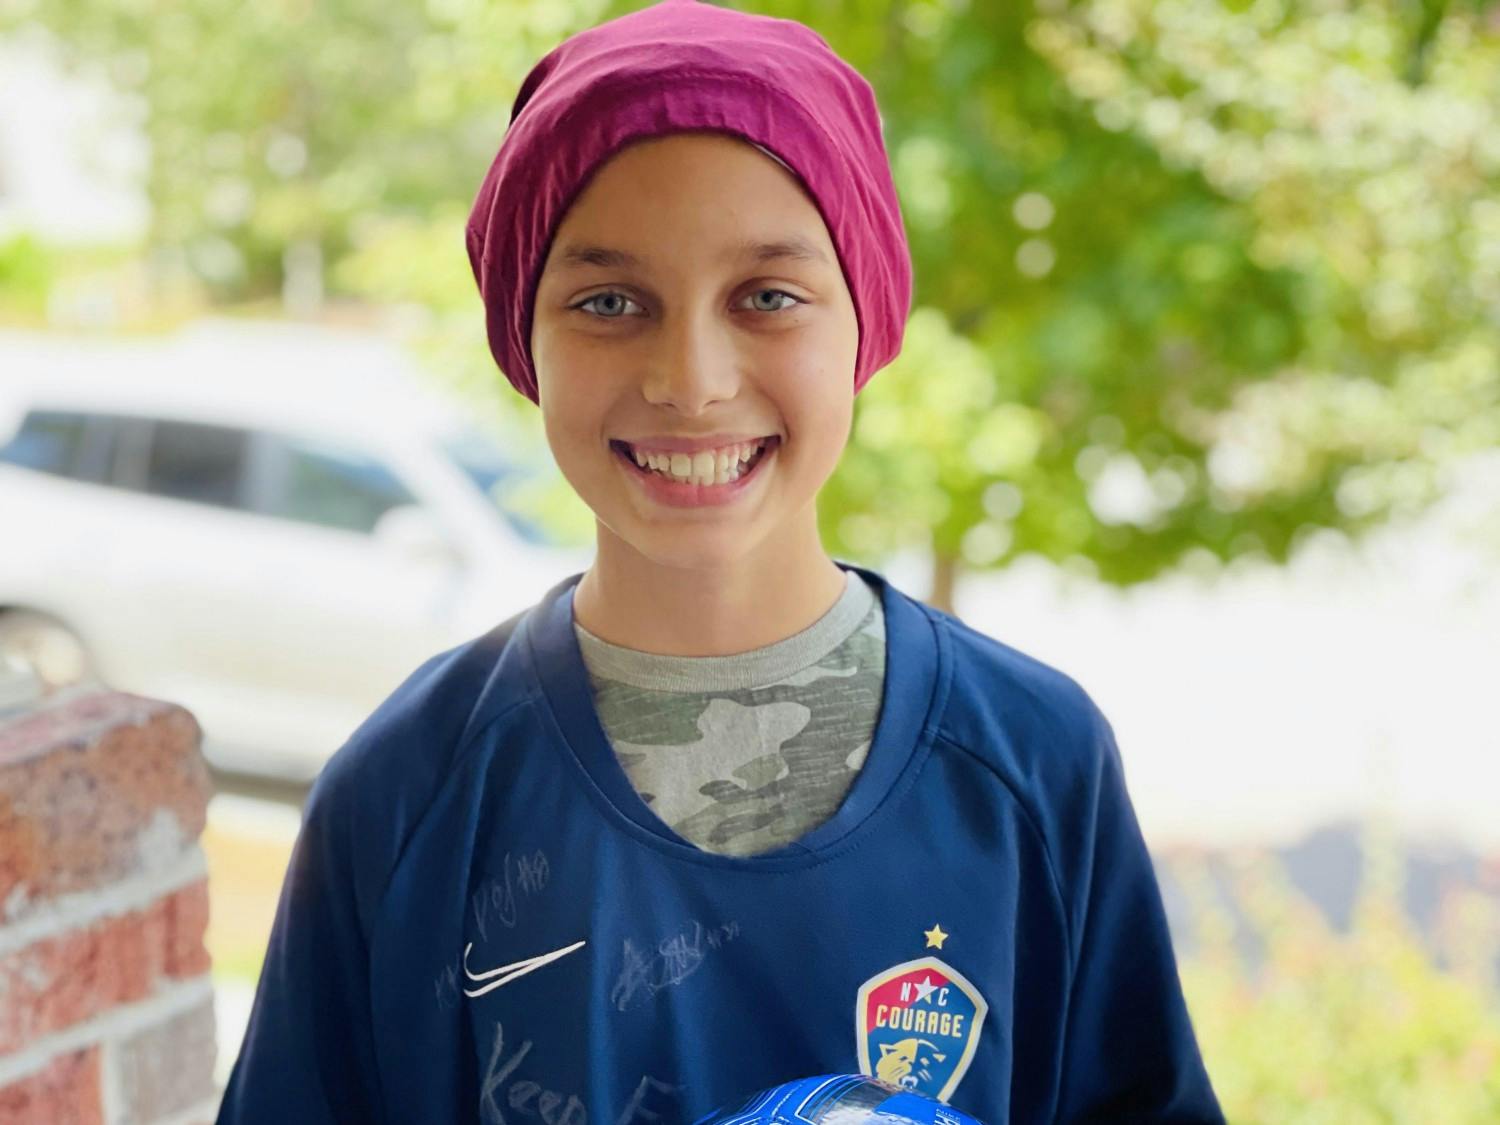 Kaleigh holds a ball signed by United States women’s national soccer team midfielder Julie Ertz and wears an N.C. Courage shirt signed by her teammates. Photo courtesy of Kristin Britton.